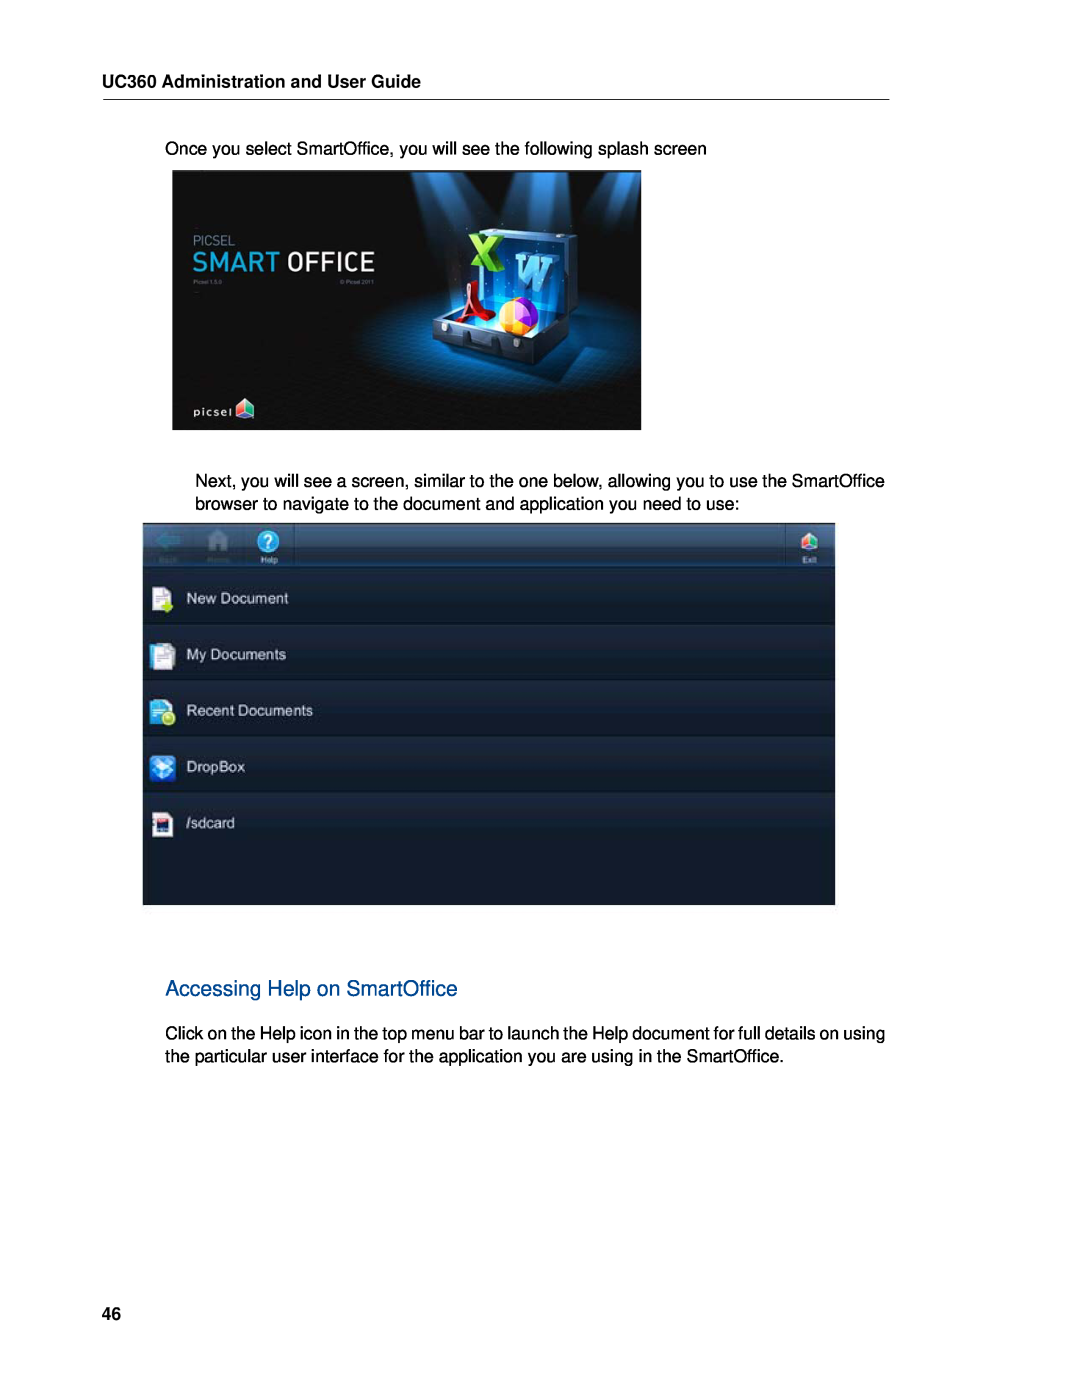 Mitel manual Accessing Help on SmartOffice, UC360 Administration and User Guide 